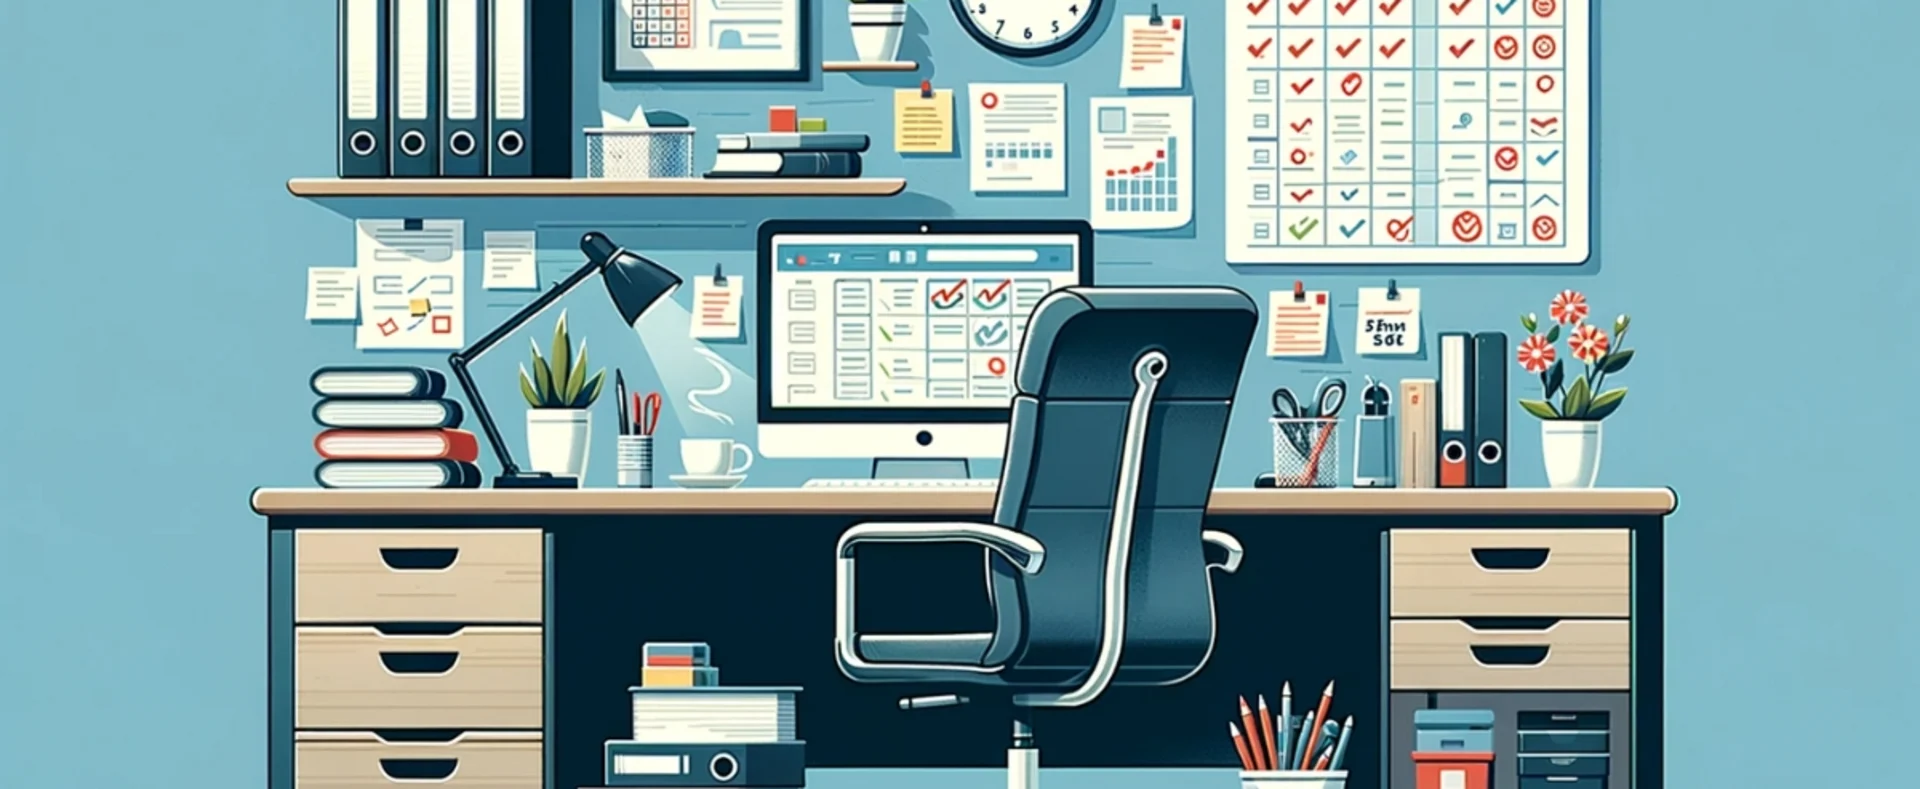 How to Get Organized at Work - Guide